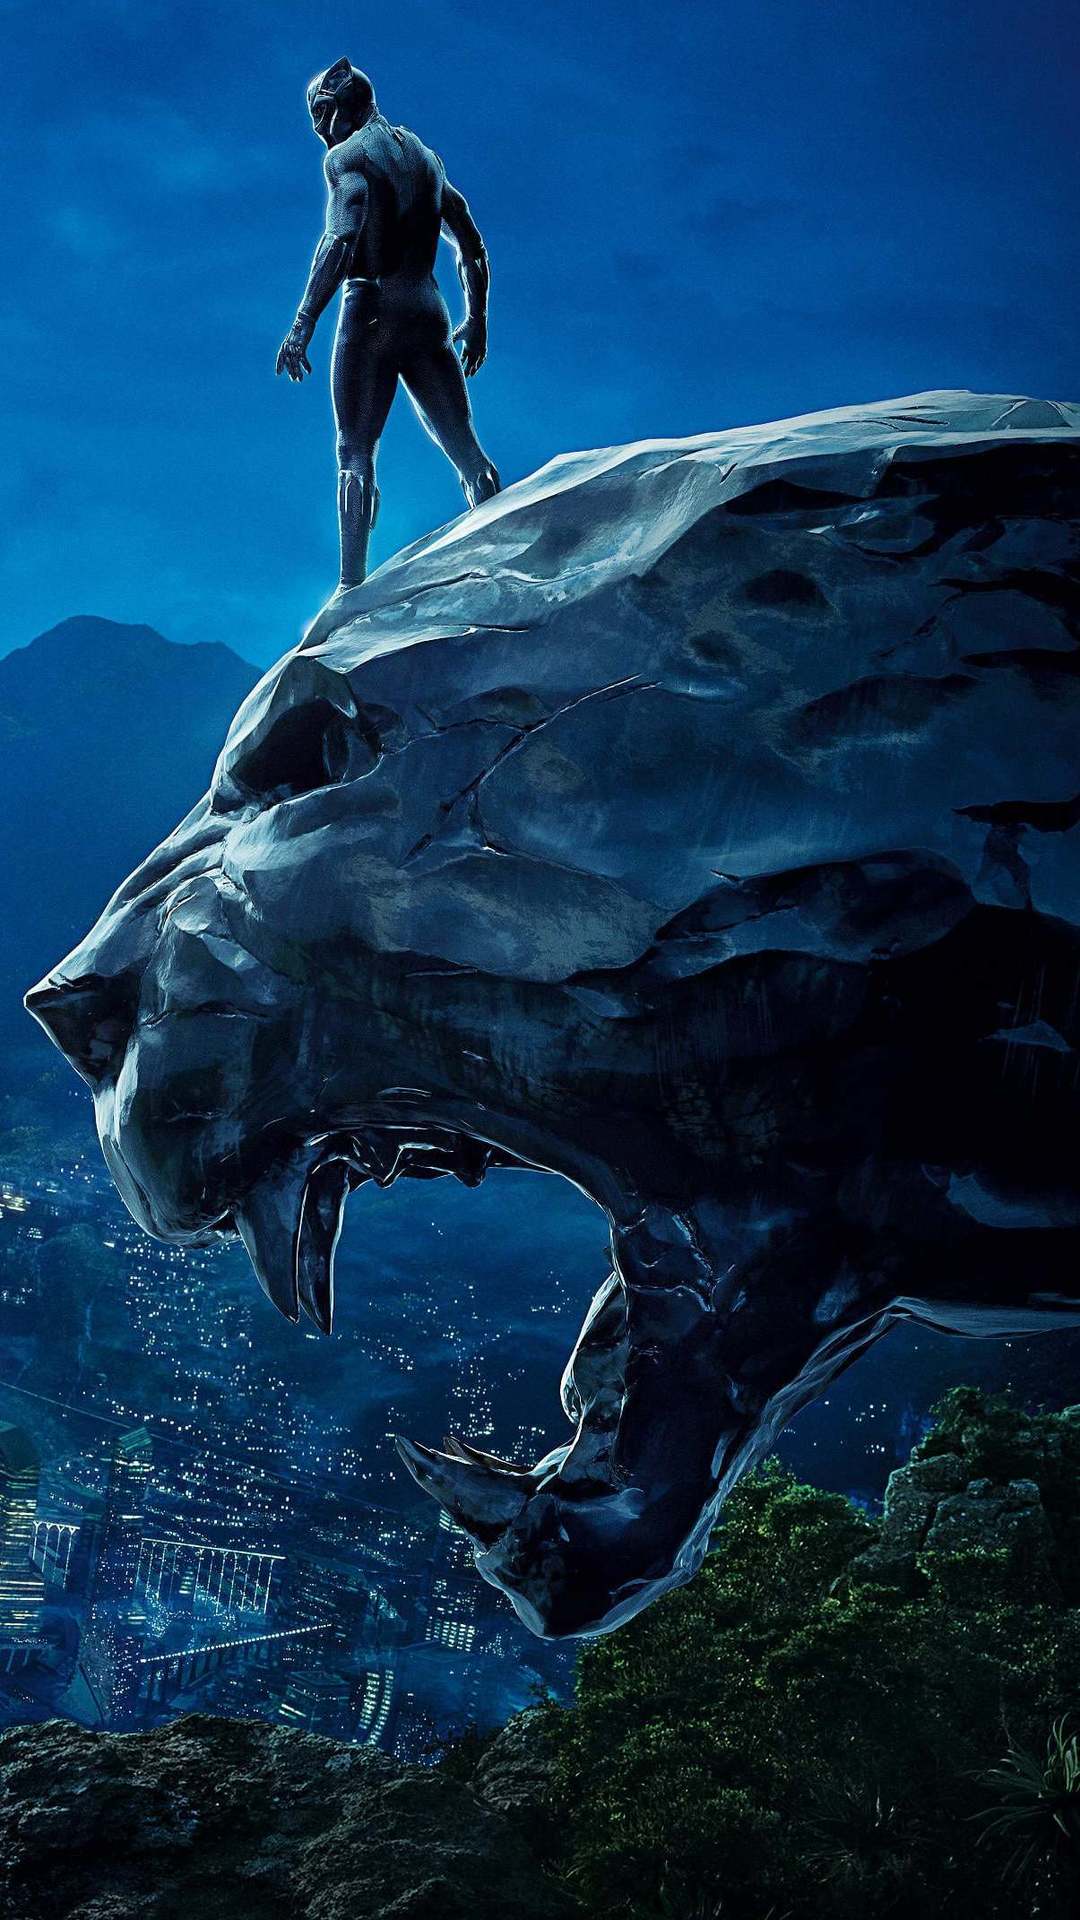 Black Panther Movie Iphone Wallpaper - Iphone Hd Wallpapers 4k - 1080x1920  Wallpaper 